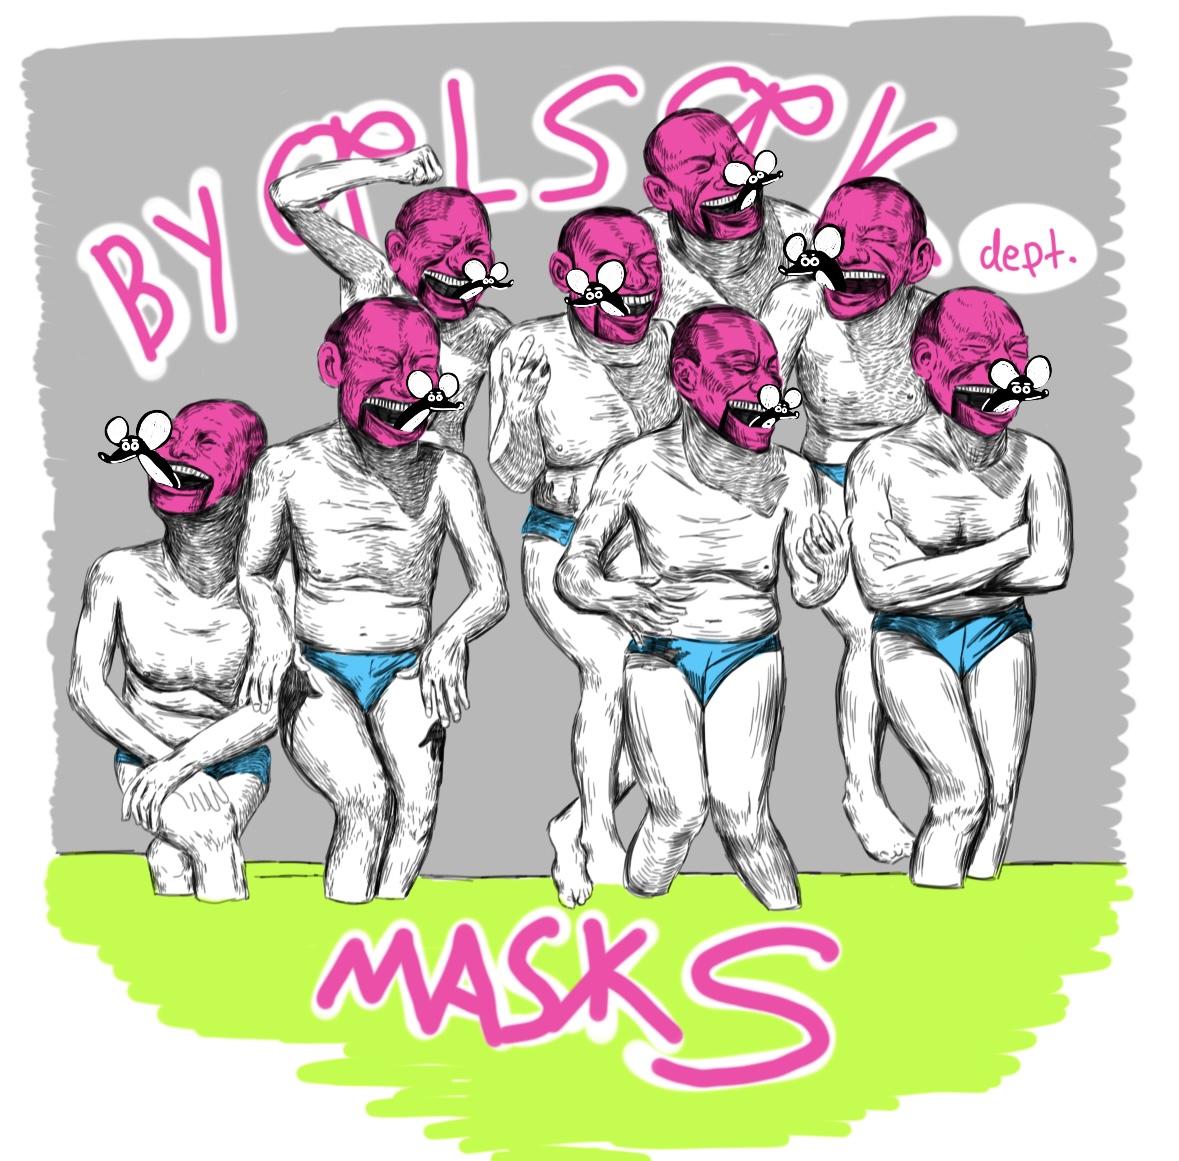 Mask for SN from FILOSOFIK department By MouseInthemouth